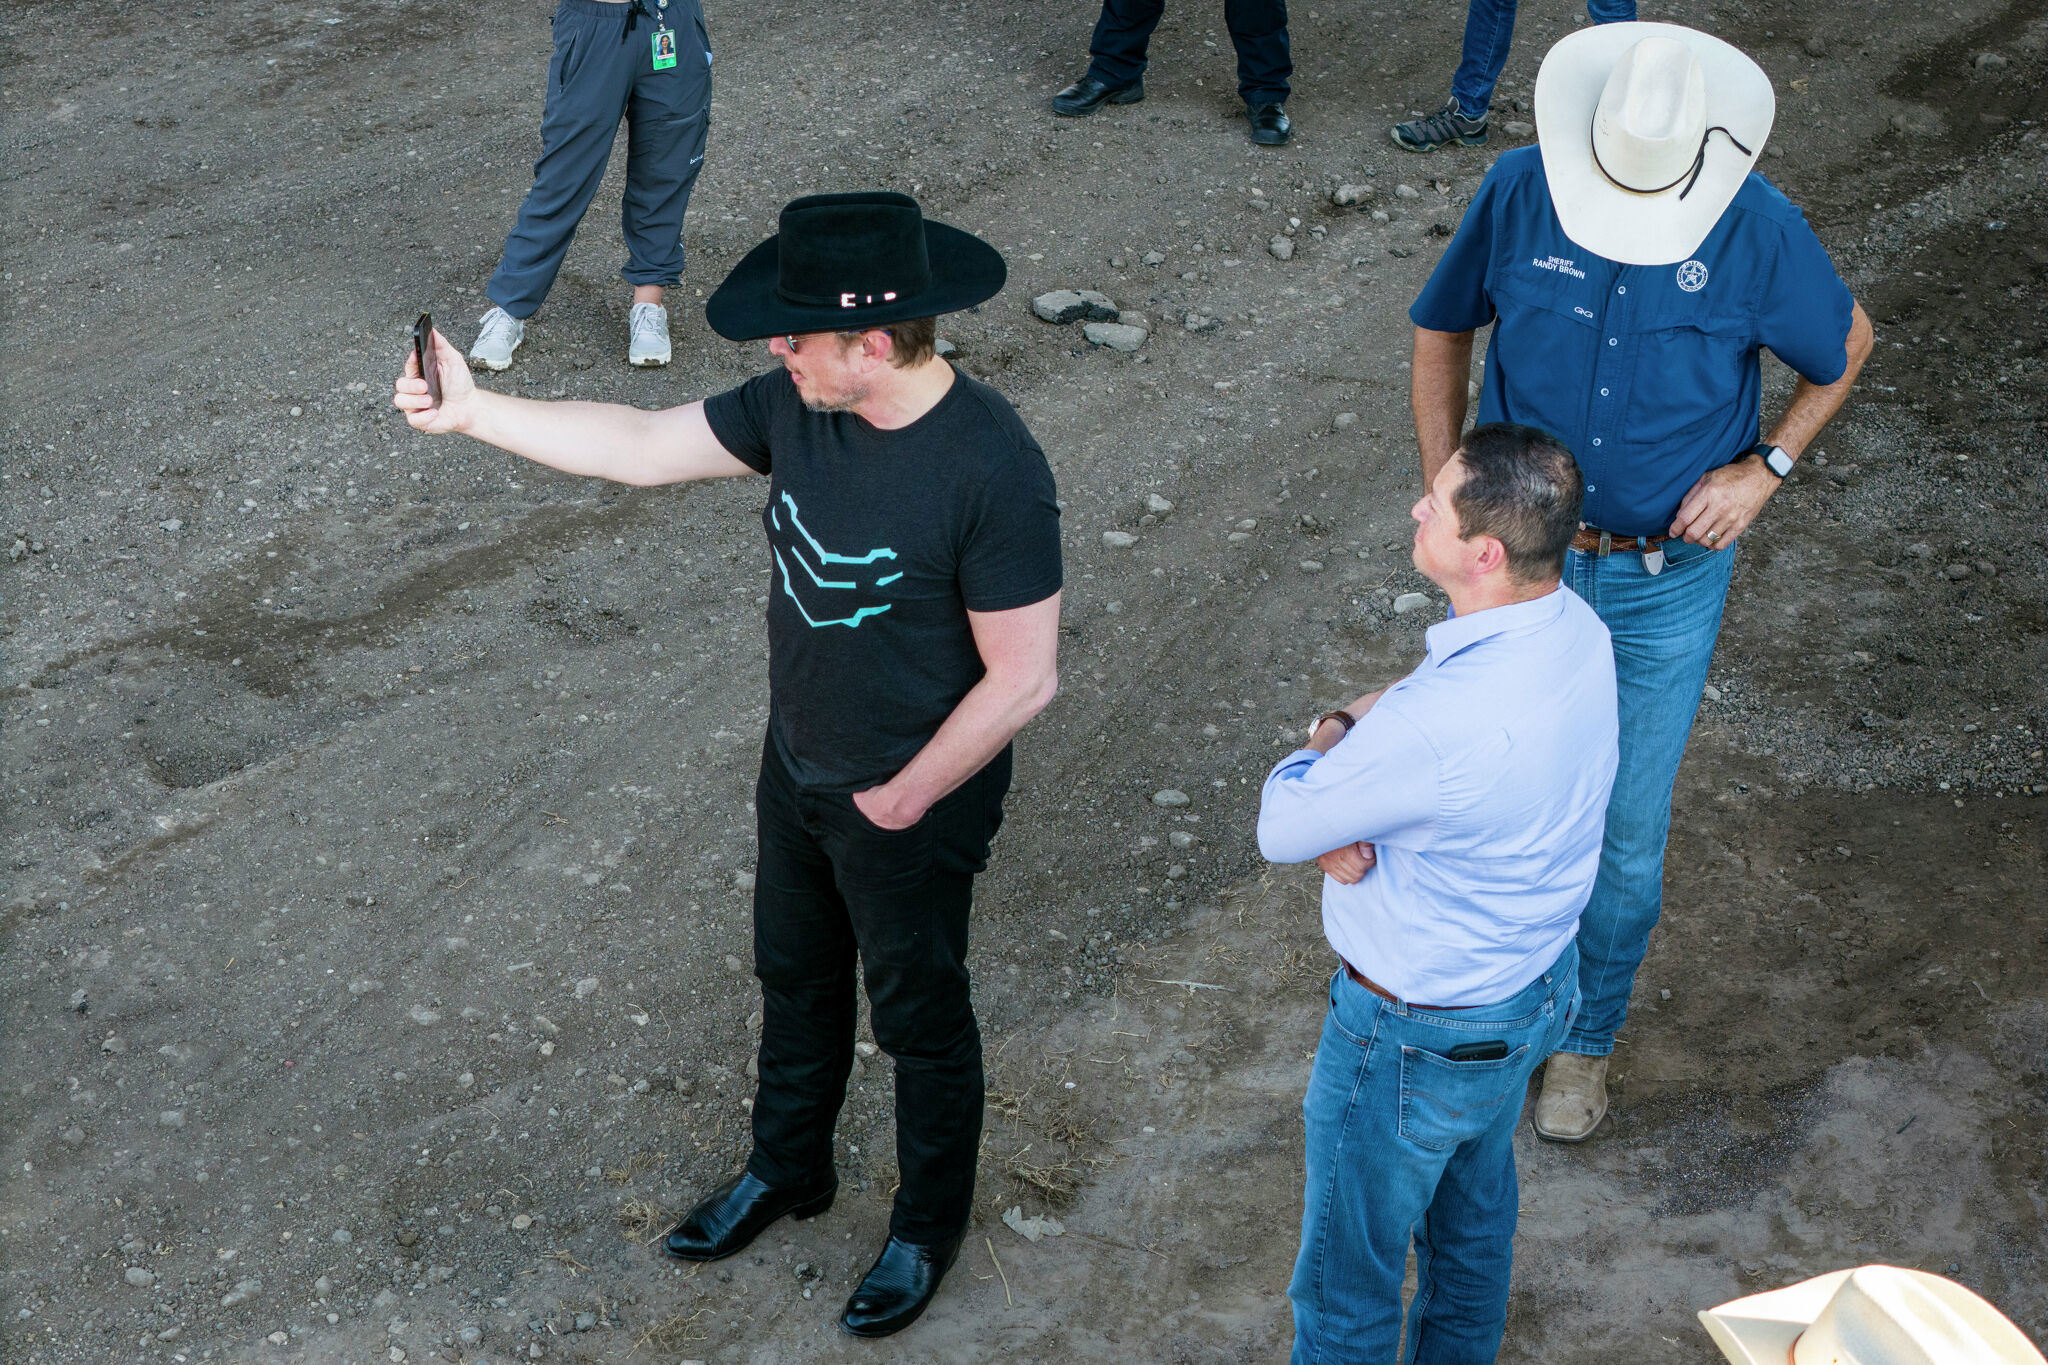 'All hat, no cattle': Elon Musk's cowboy hat during border visit draws ...